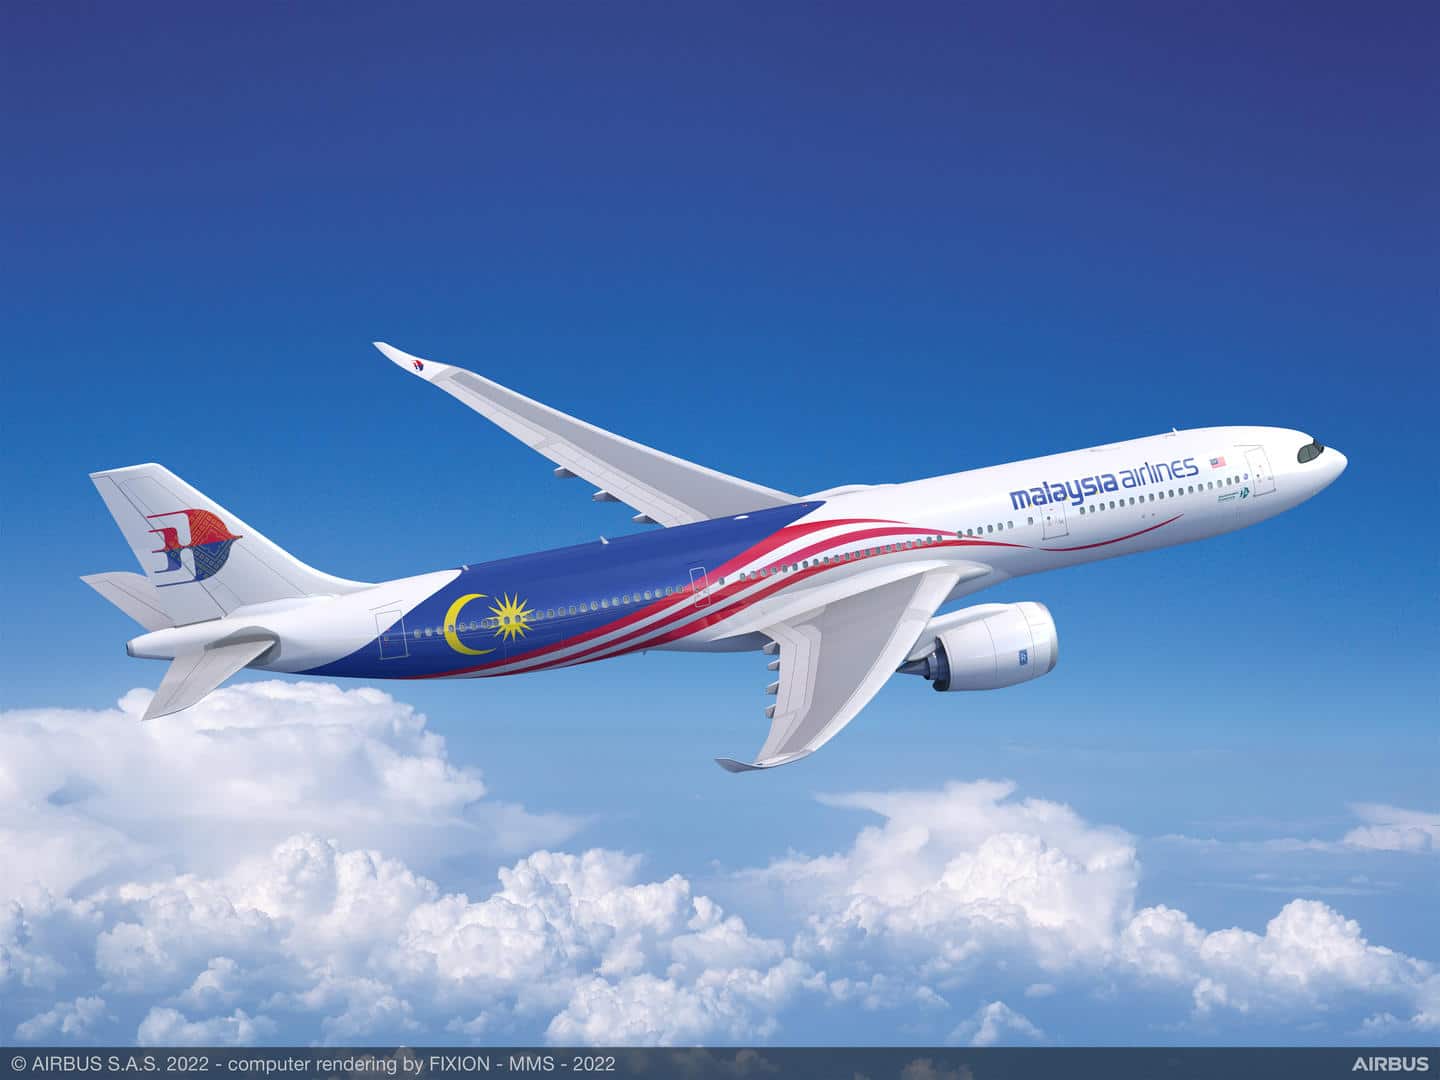 Malaysia Airlines to acquire 20 A330neo for wide body fleet renewal